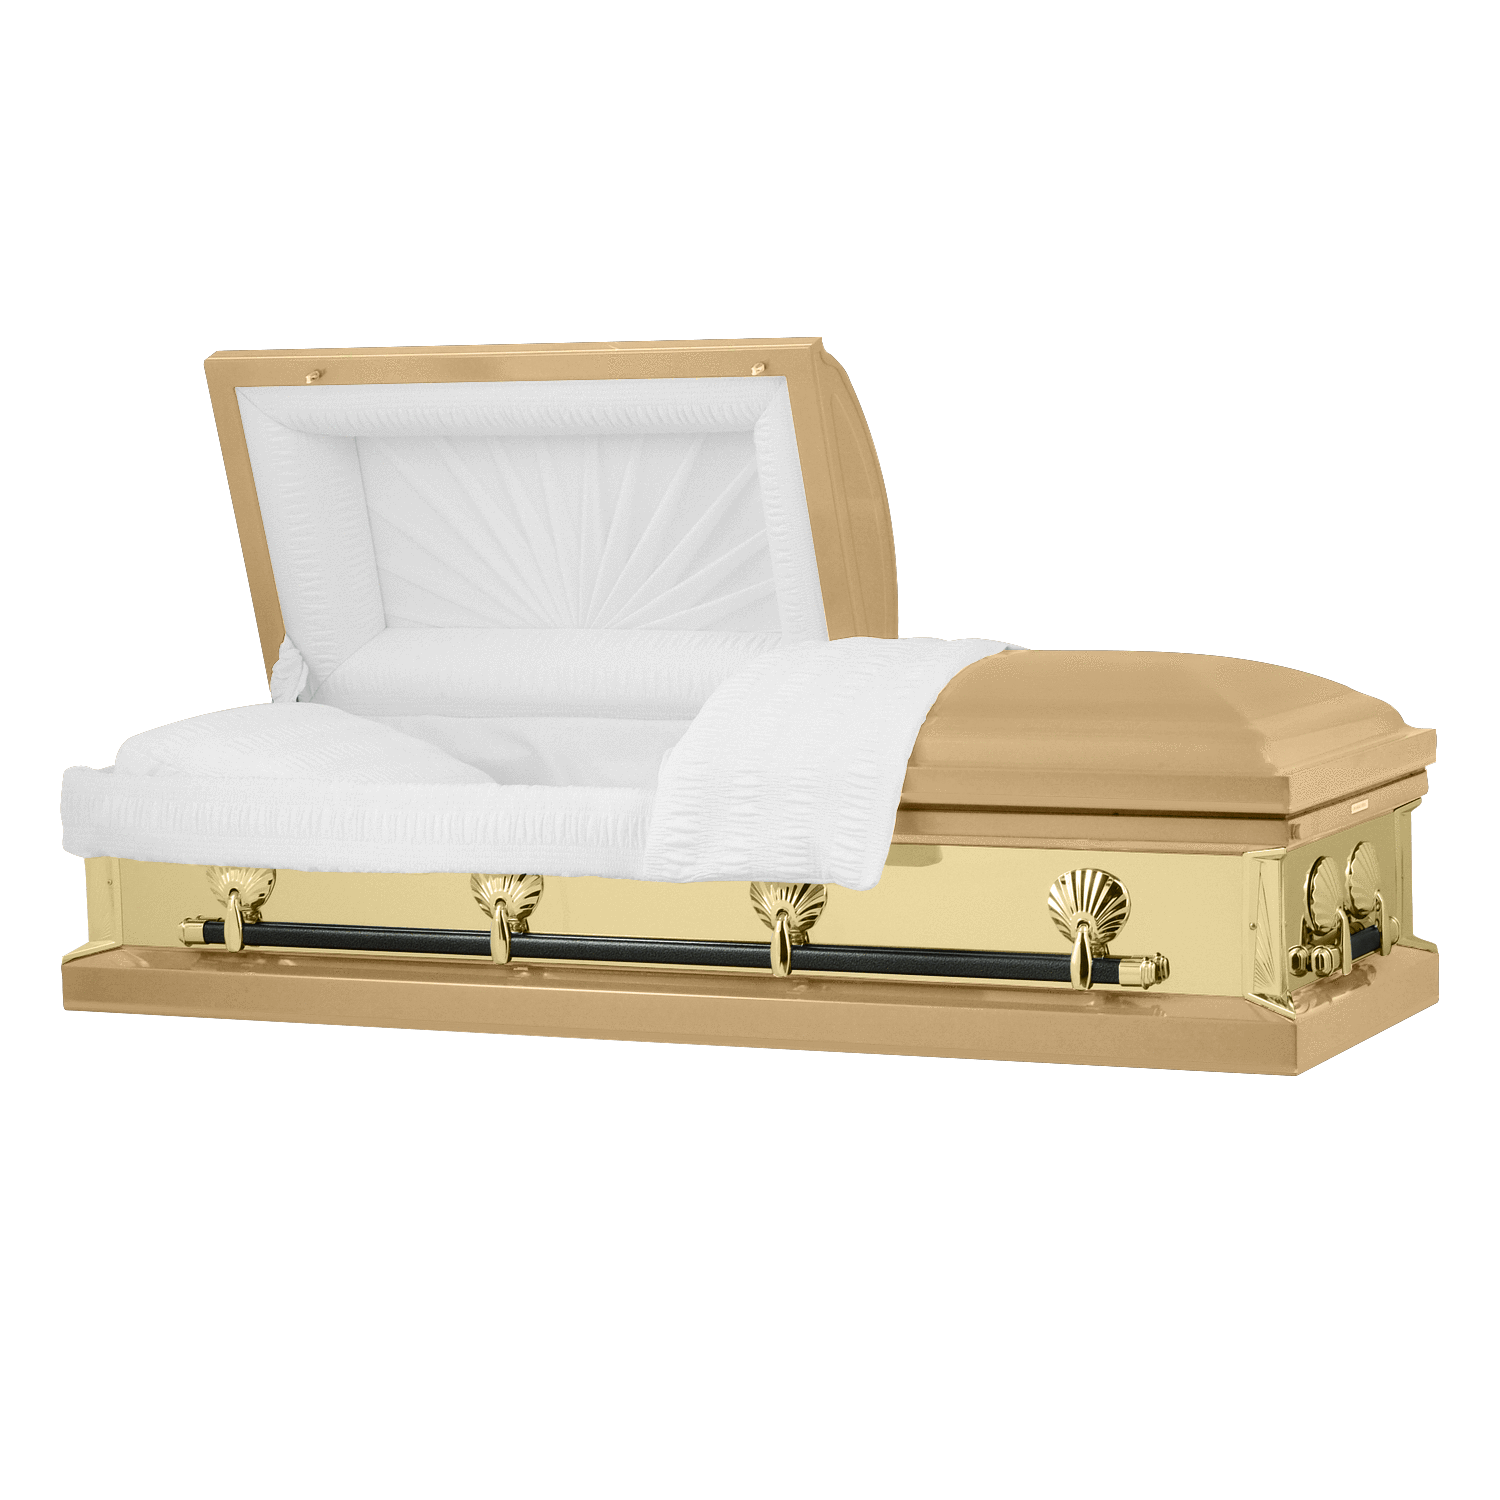 Load image into Gallery viewer, Reflections Series | Gold Steel Casket with White Interior - Titan Casket
